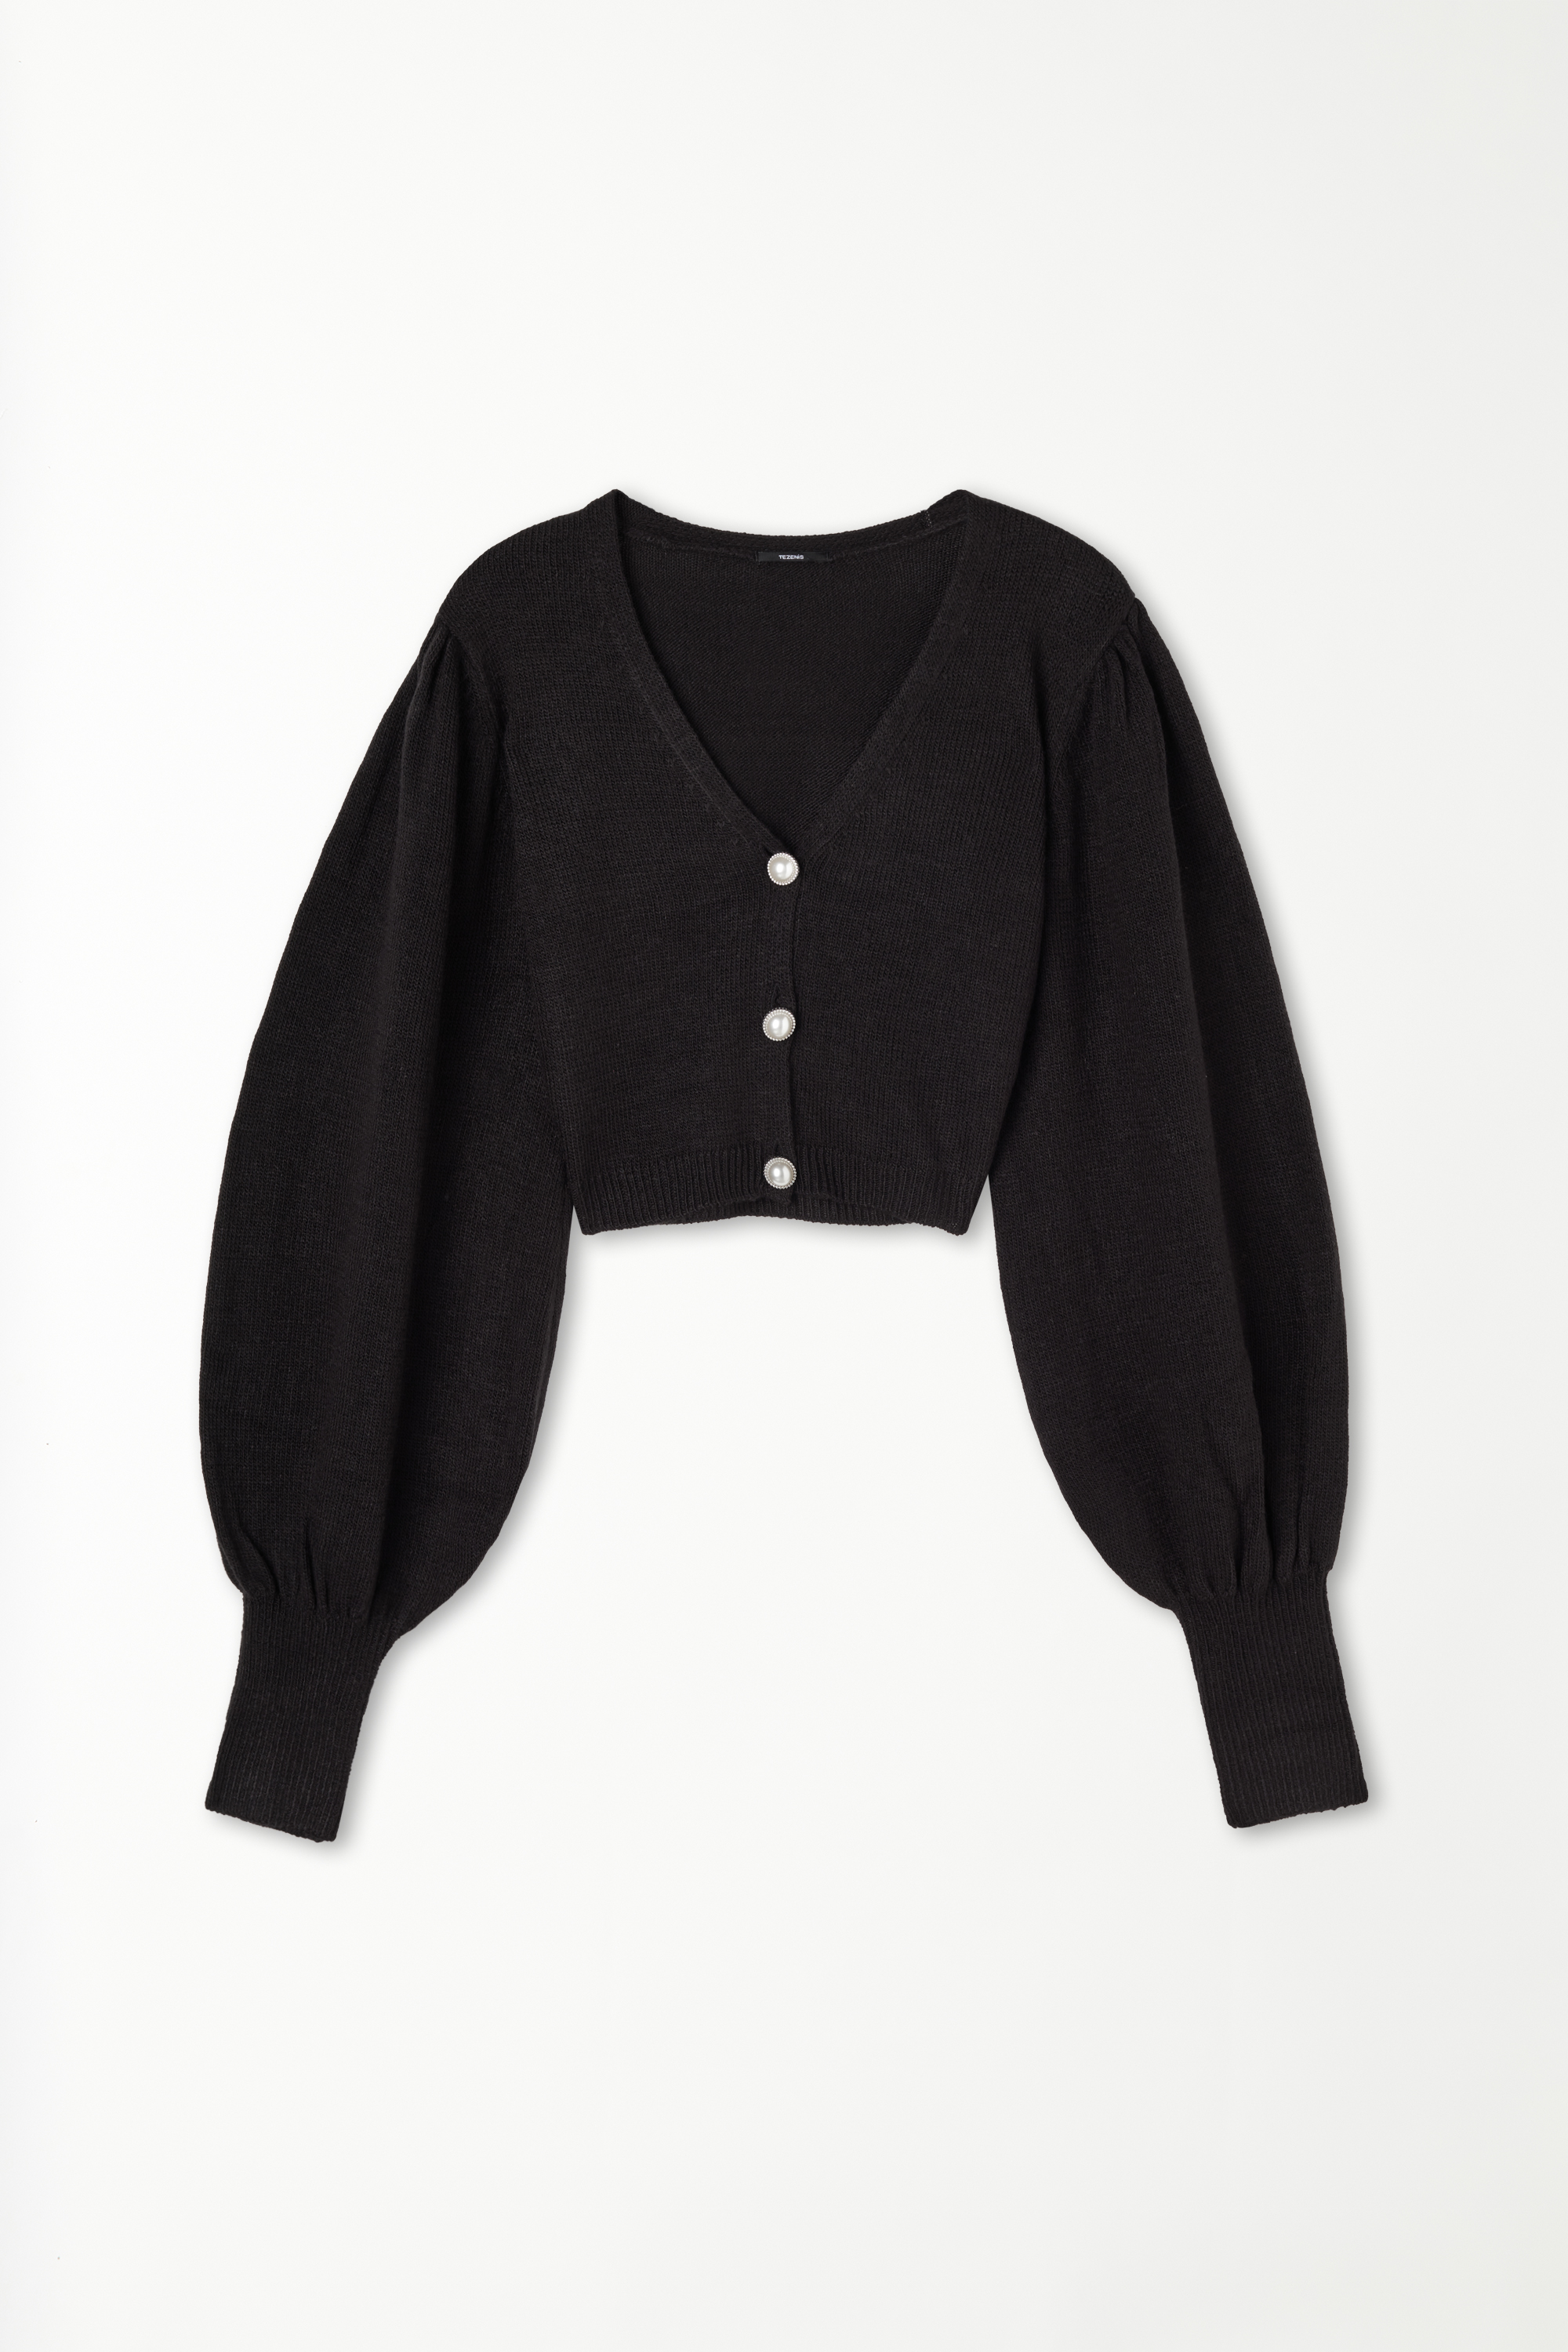 Long-Sleeved Button-Down Fully-Fashioned Cropped Cardigan